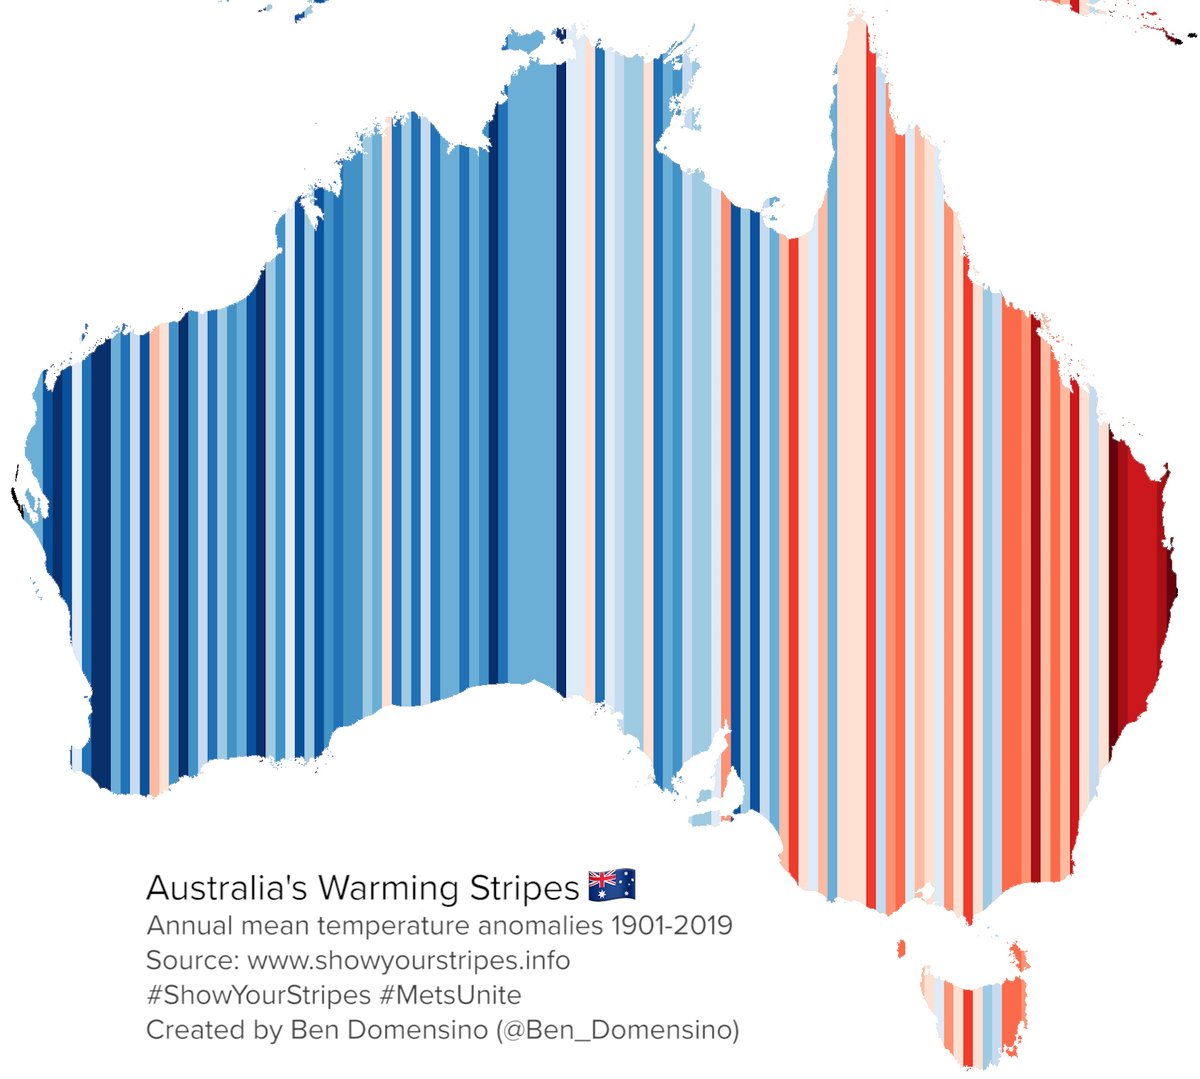 Australia has warmed by more than 1ºC during the last century and last year was our country's warmest on record. This map shows how Australia's annual mean temperature has changed since 1901 using @ed_hawkins #climatestripes
#MetsUnite 
#showyourstripes